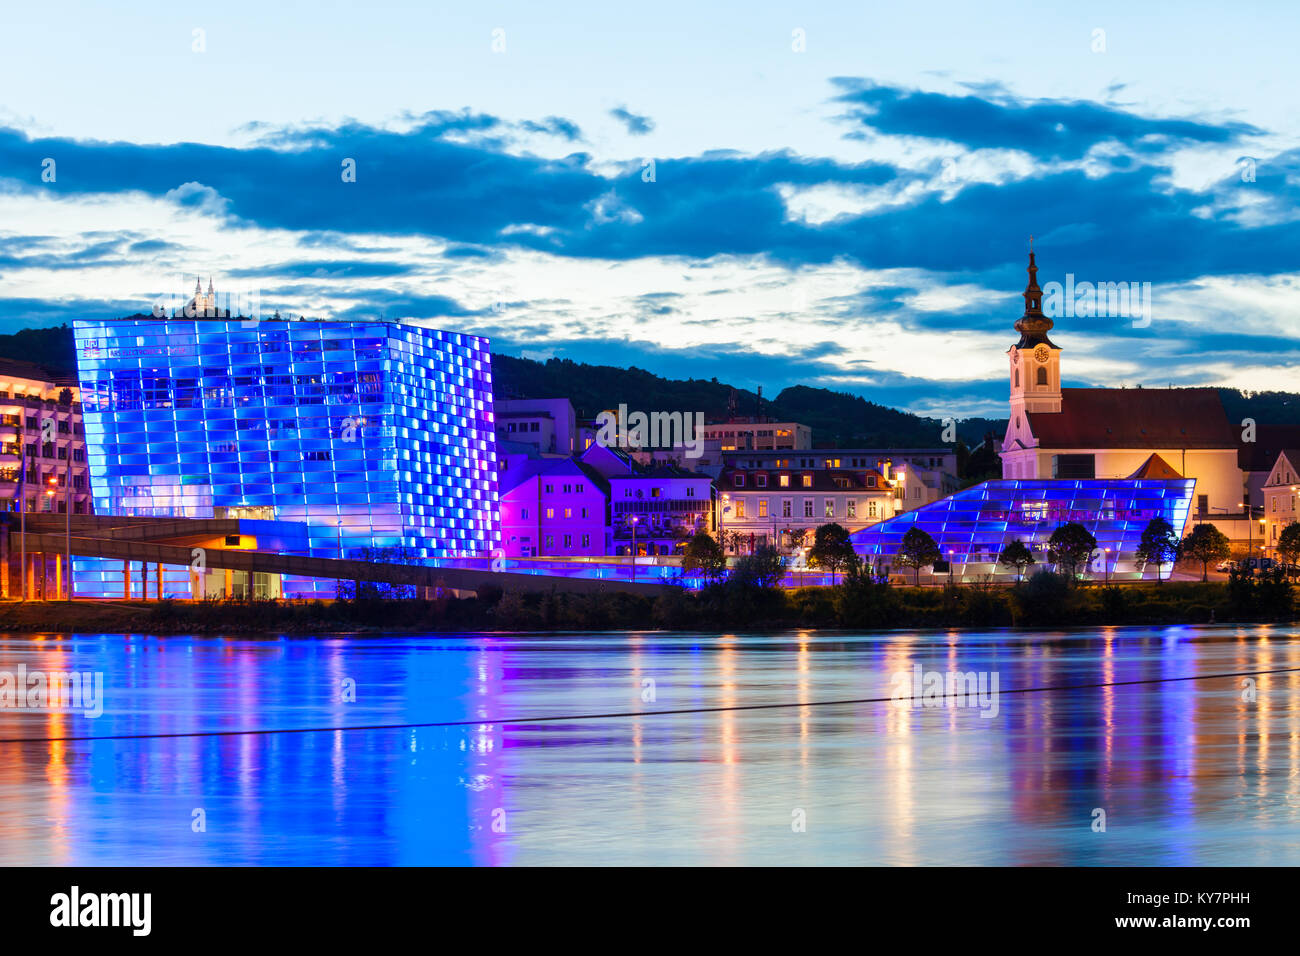 LINZ, AUSTRIA - MAY 14, 2017: The Ars Electronica Center or AEC is a center for electronic arts run by Ars Electronica located in Linz, Austria. Stock Photo